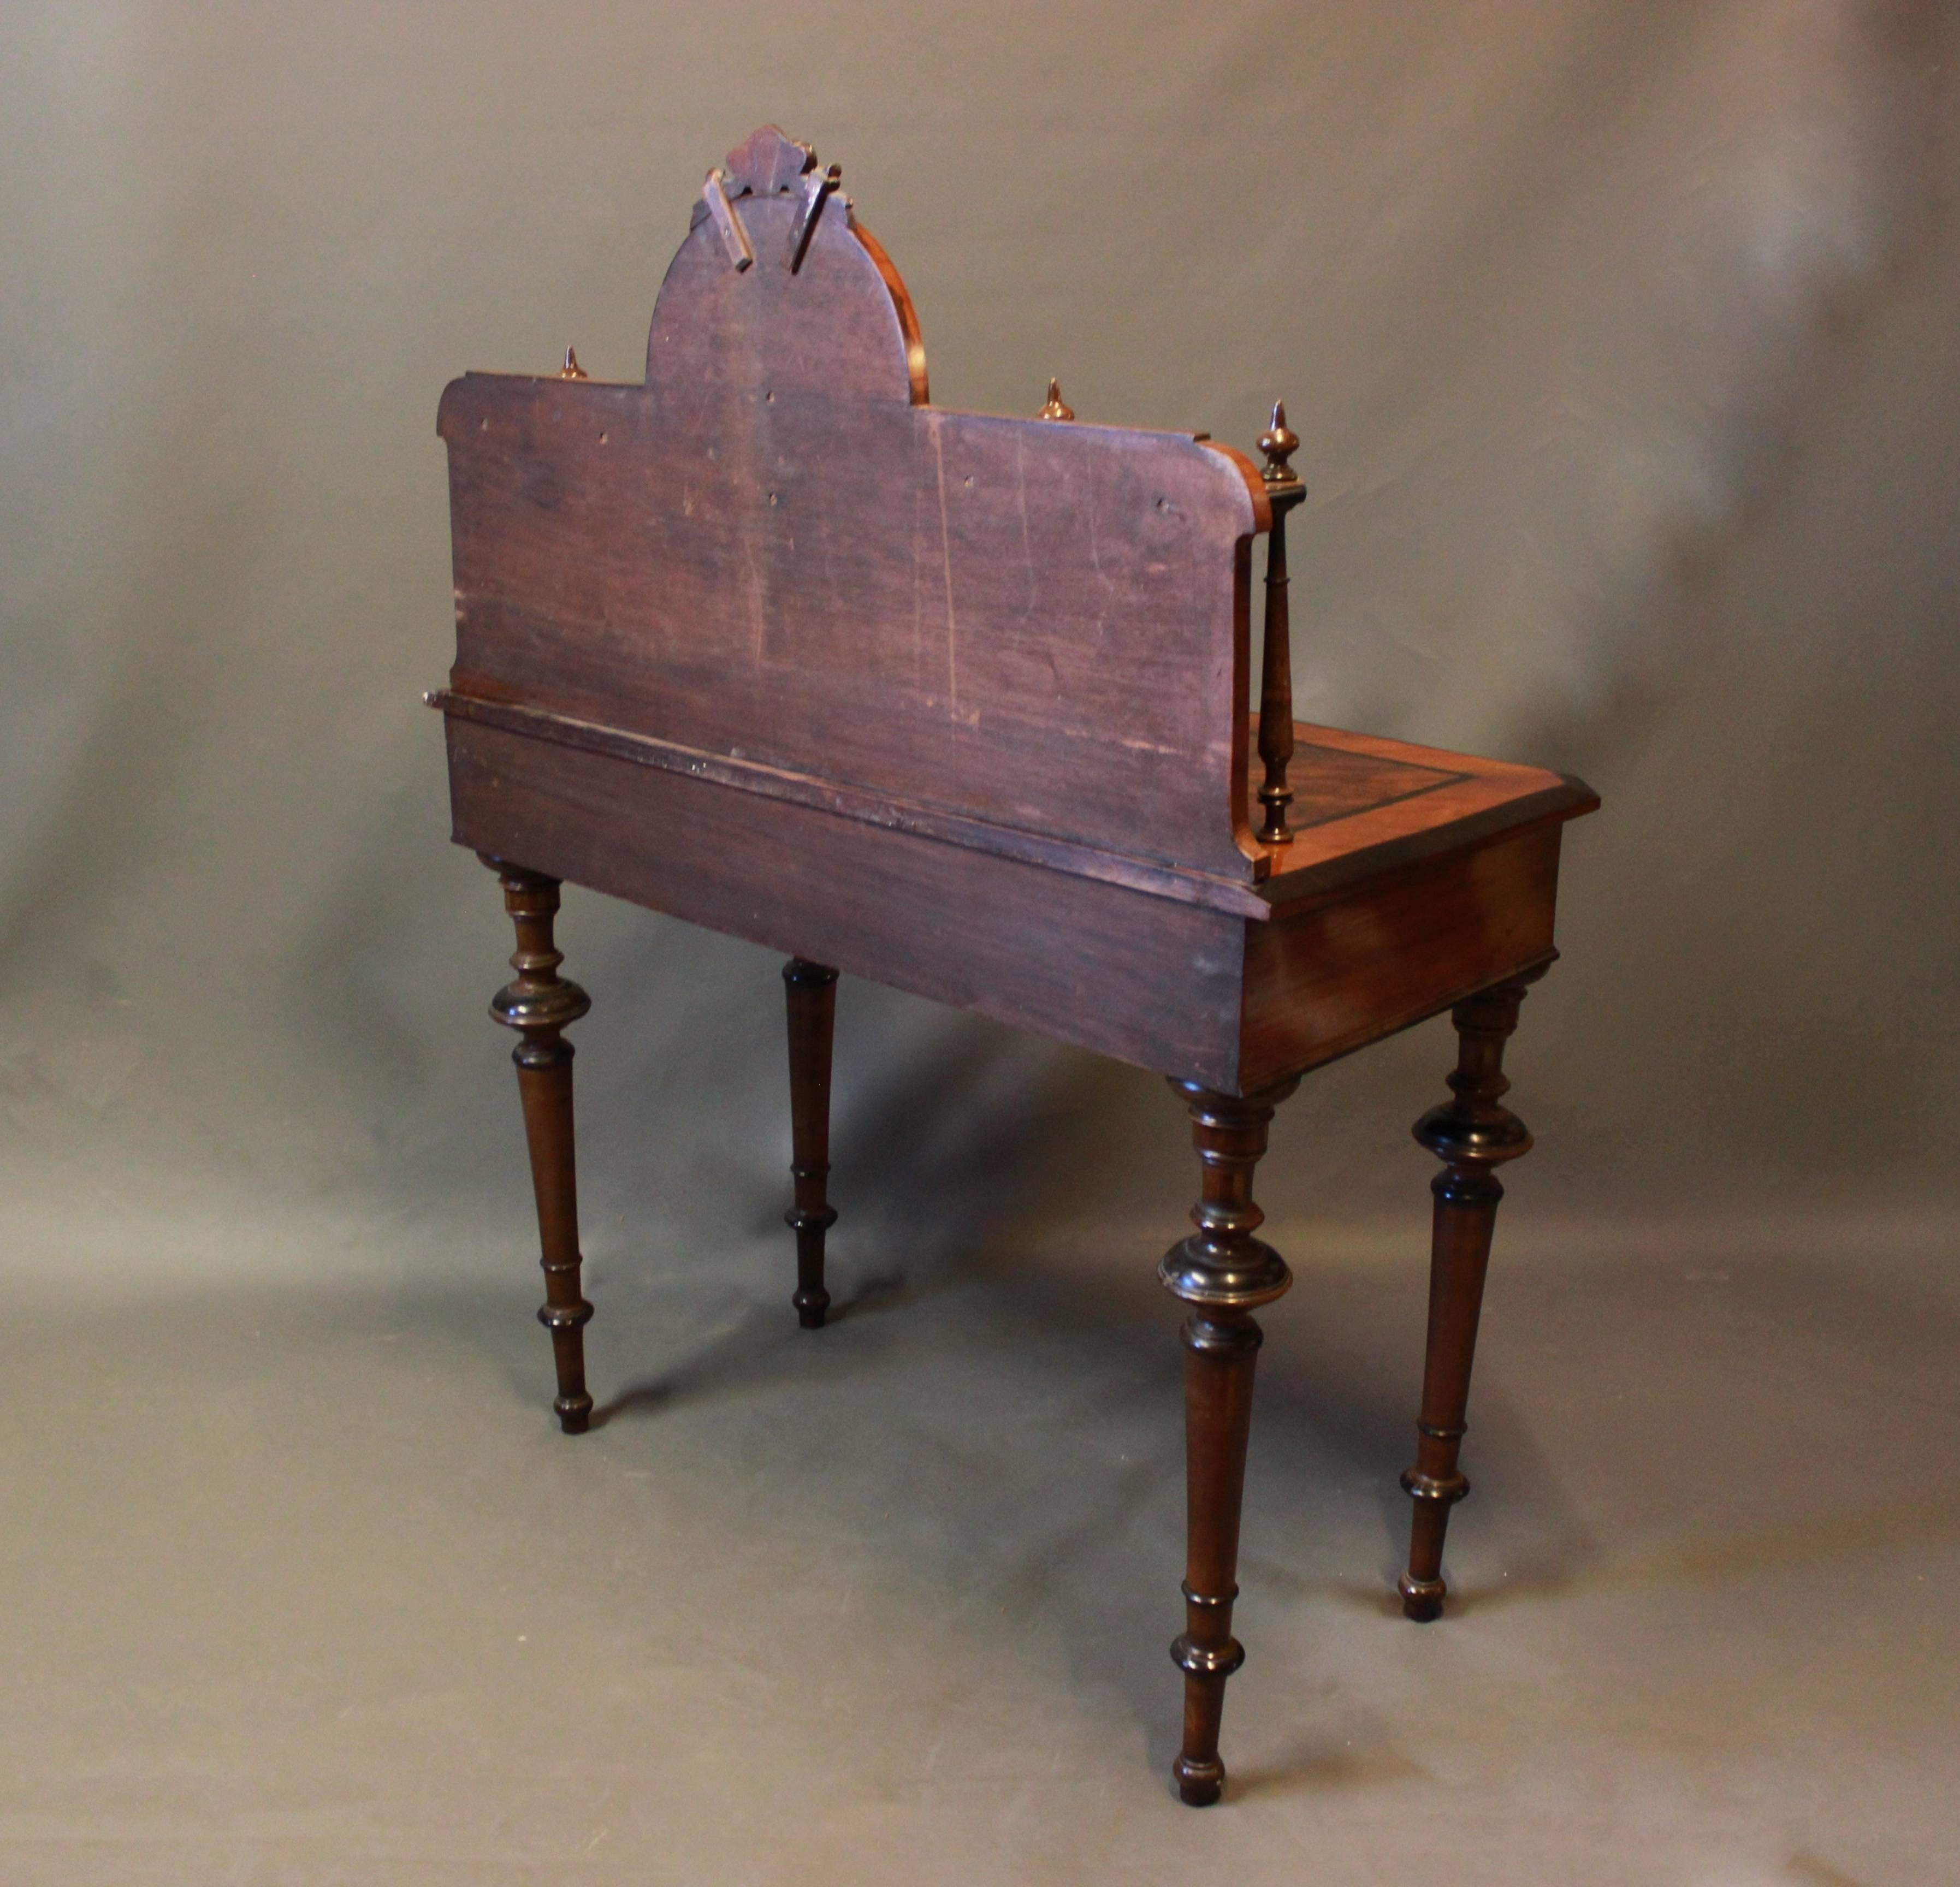 Mid-19th Century Ladies Desk in Handpolished Walnut from the 1860s